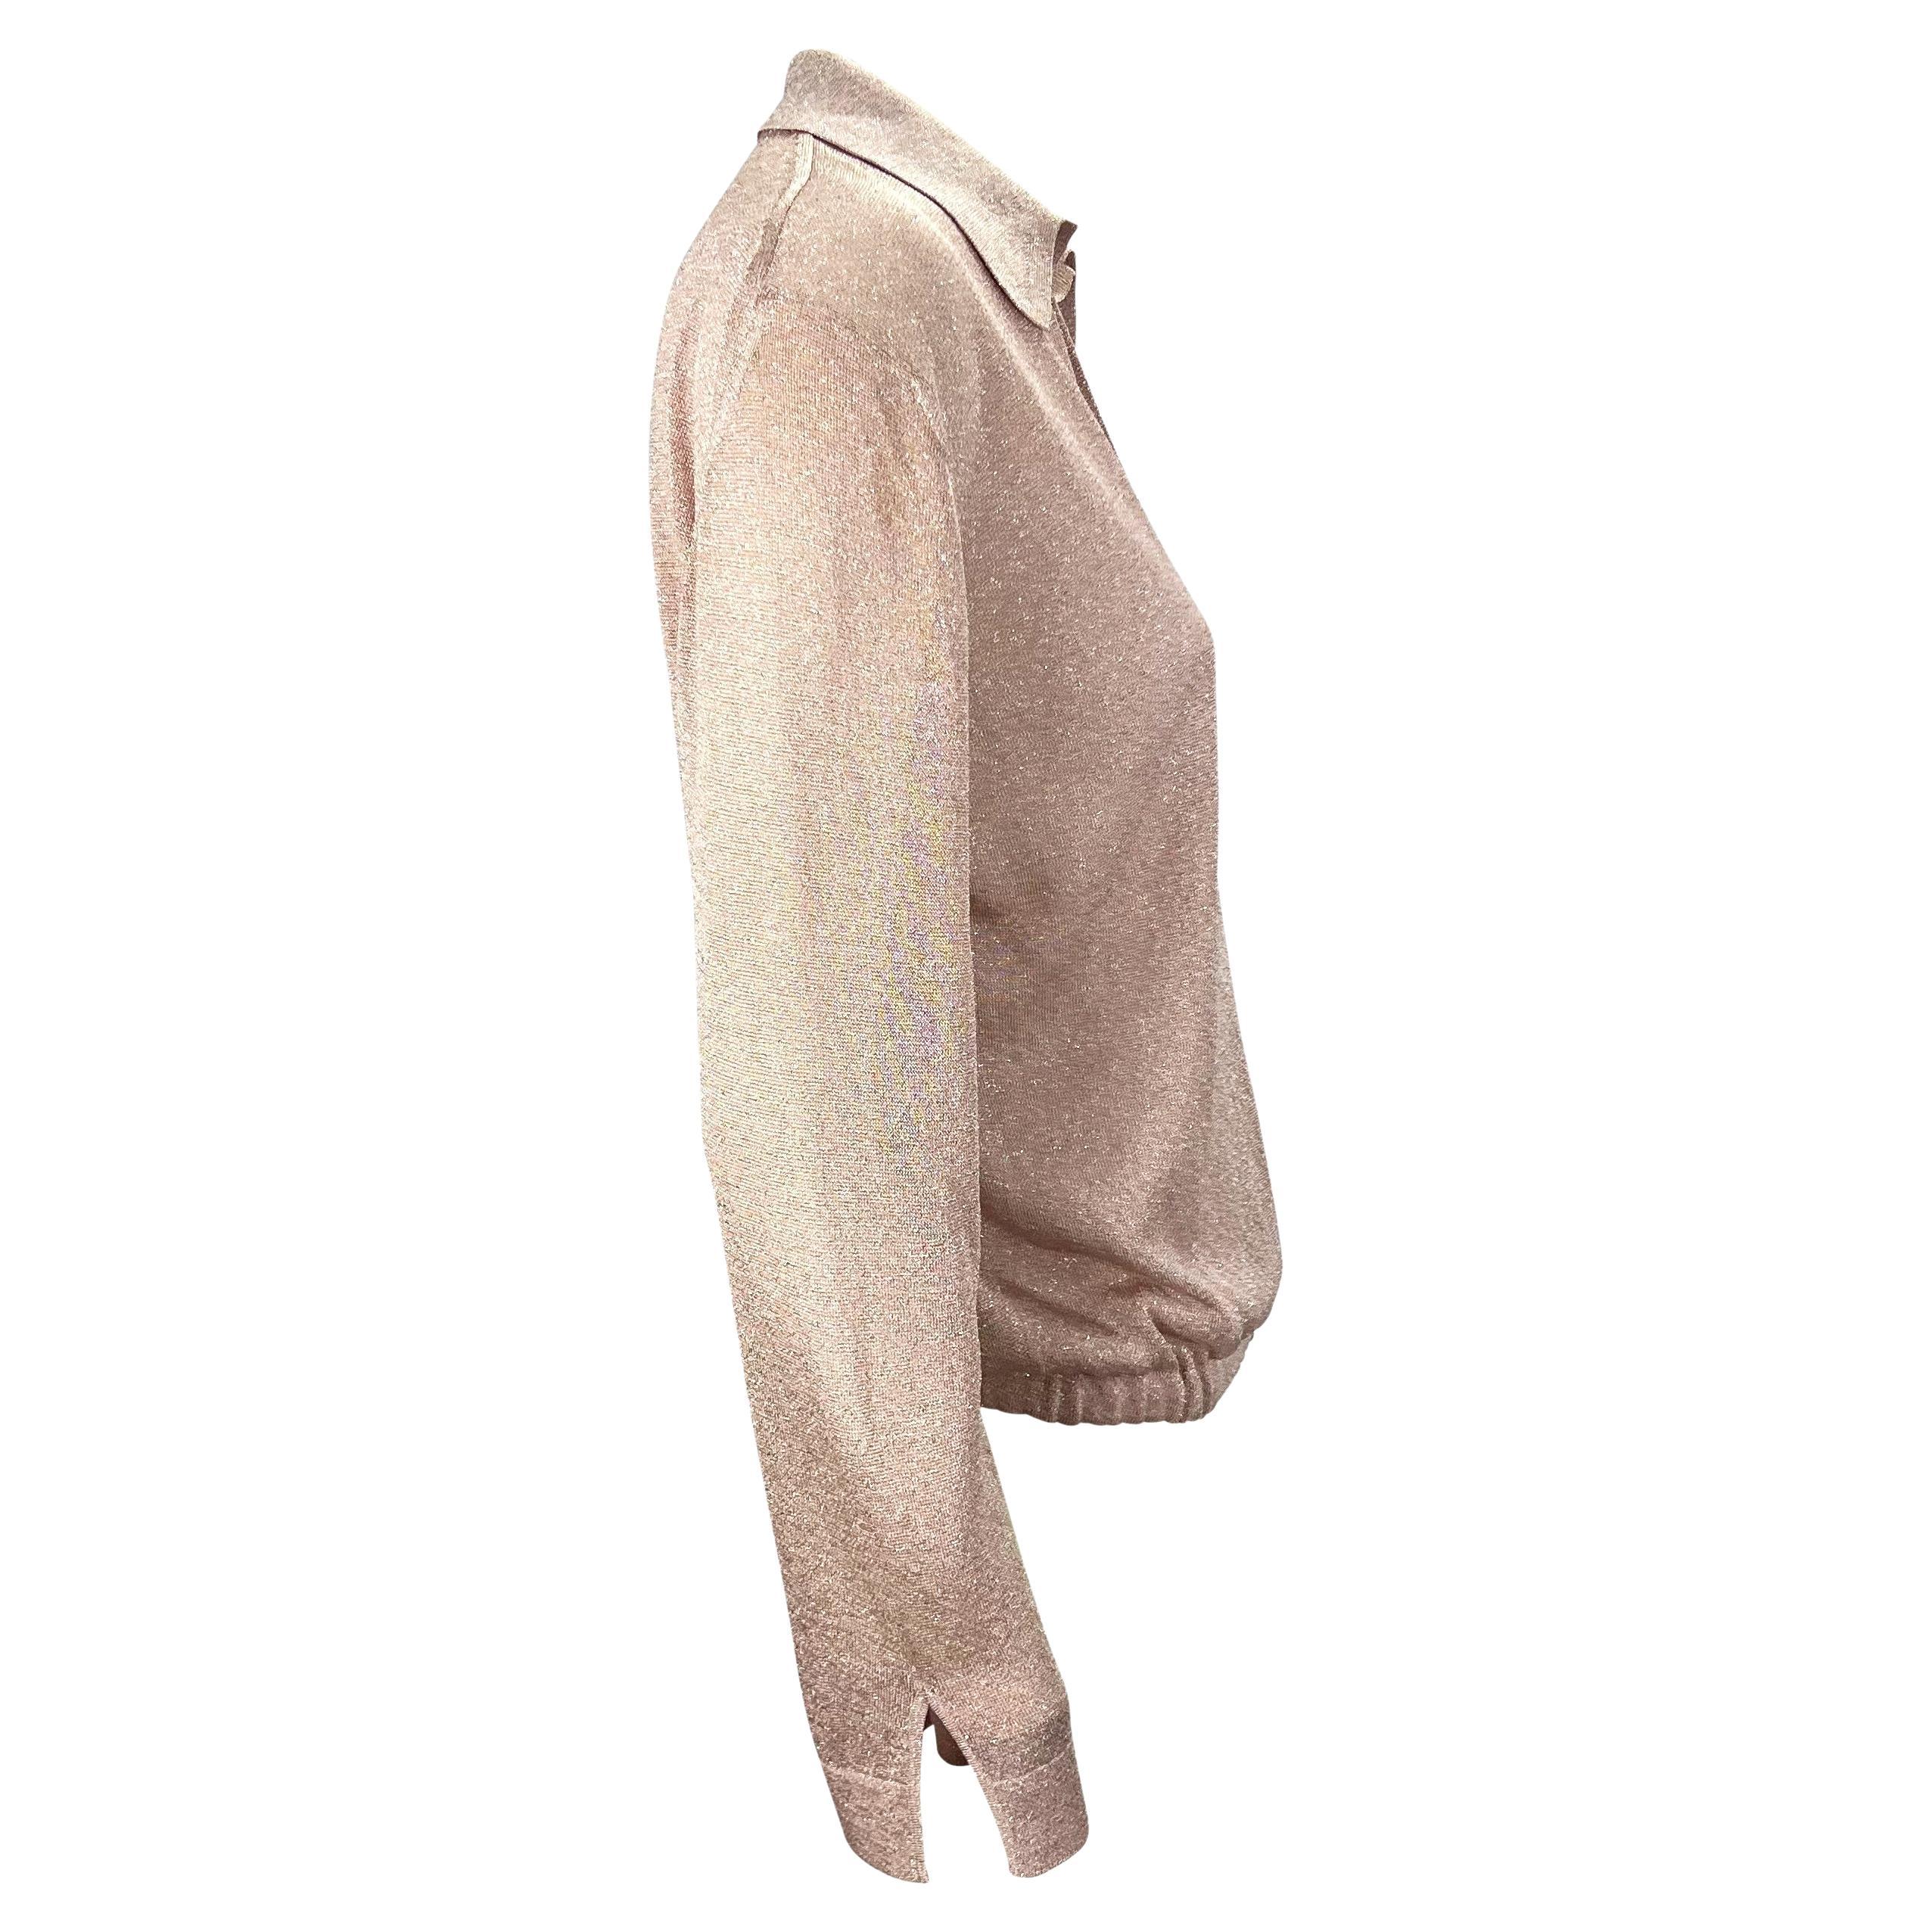 Women's S/S 2000 Gucci by Tom Ford Runway Sheer Blush Pink Lurex Knit Belted Top For Sale